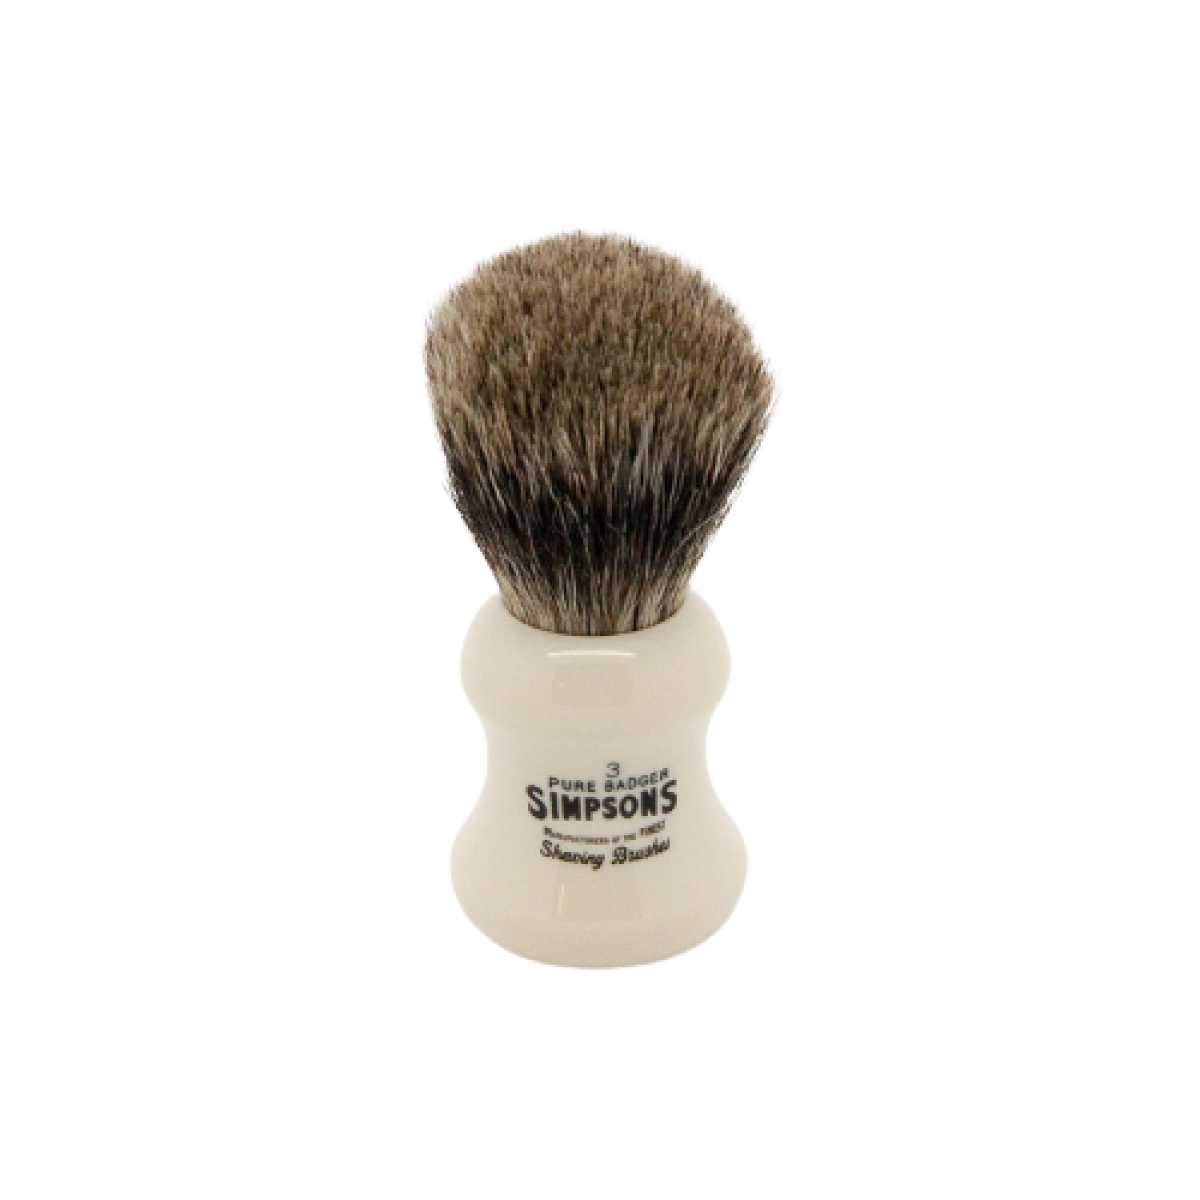 Primary Image of The Eagle G3 Pure Badger Brush